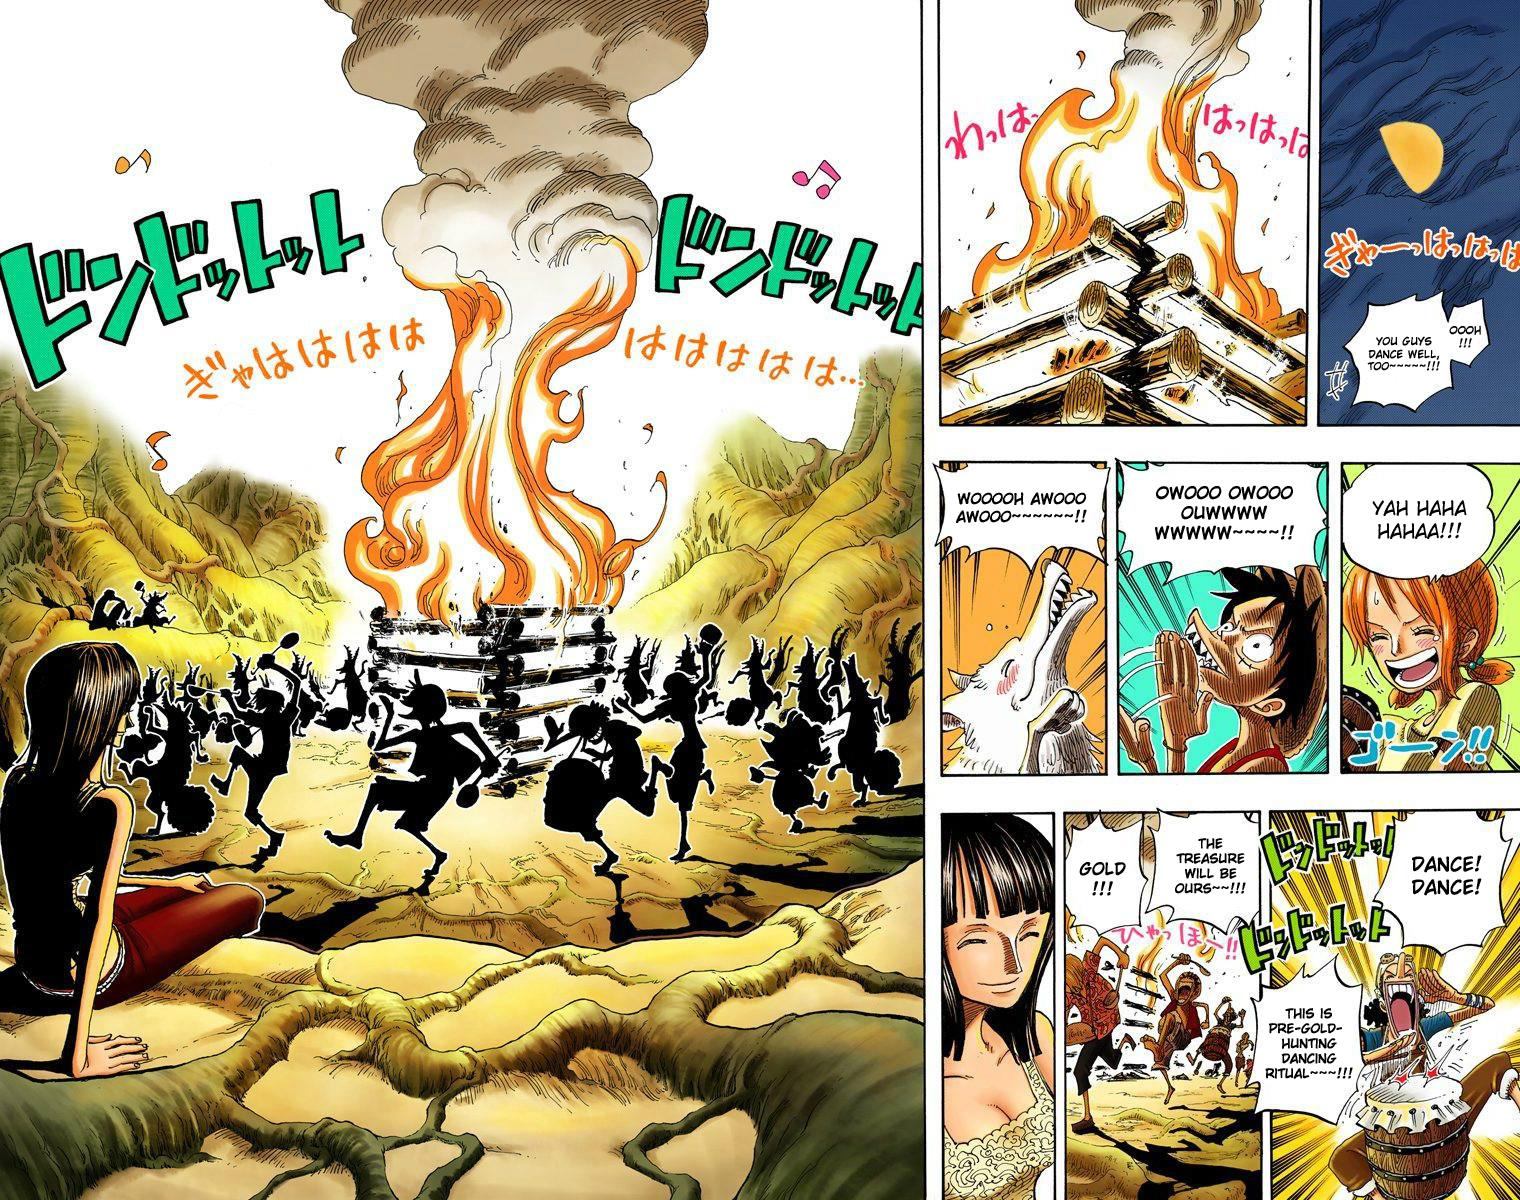 Artur Library Of Ohara Oda Reveals His Top Three Favorite Scenes In One Piece Oda S 3rd Favorite Scene In Op The Campfire Scene At Skypiea In Chapter 253